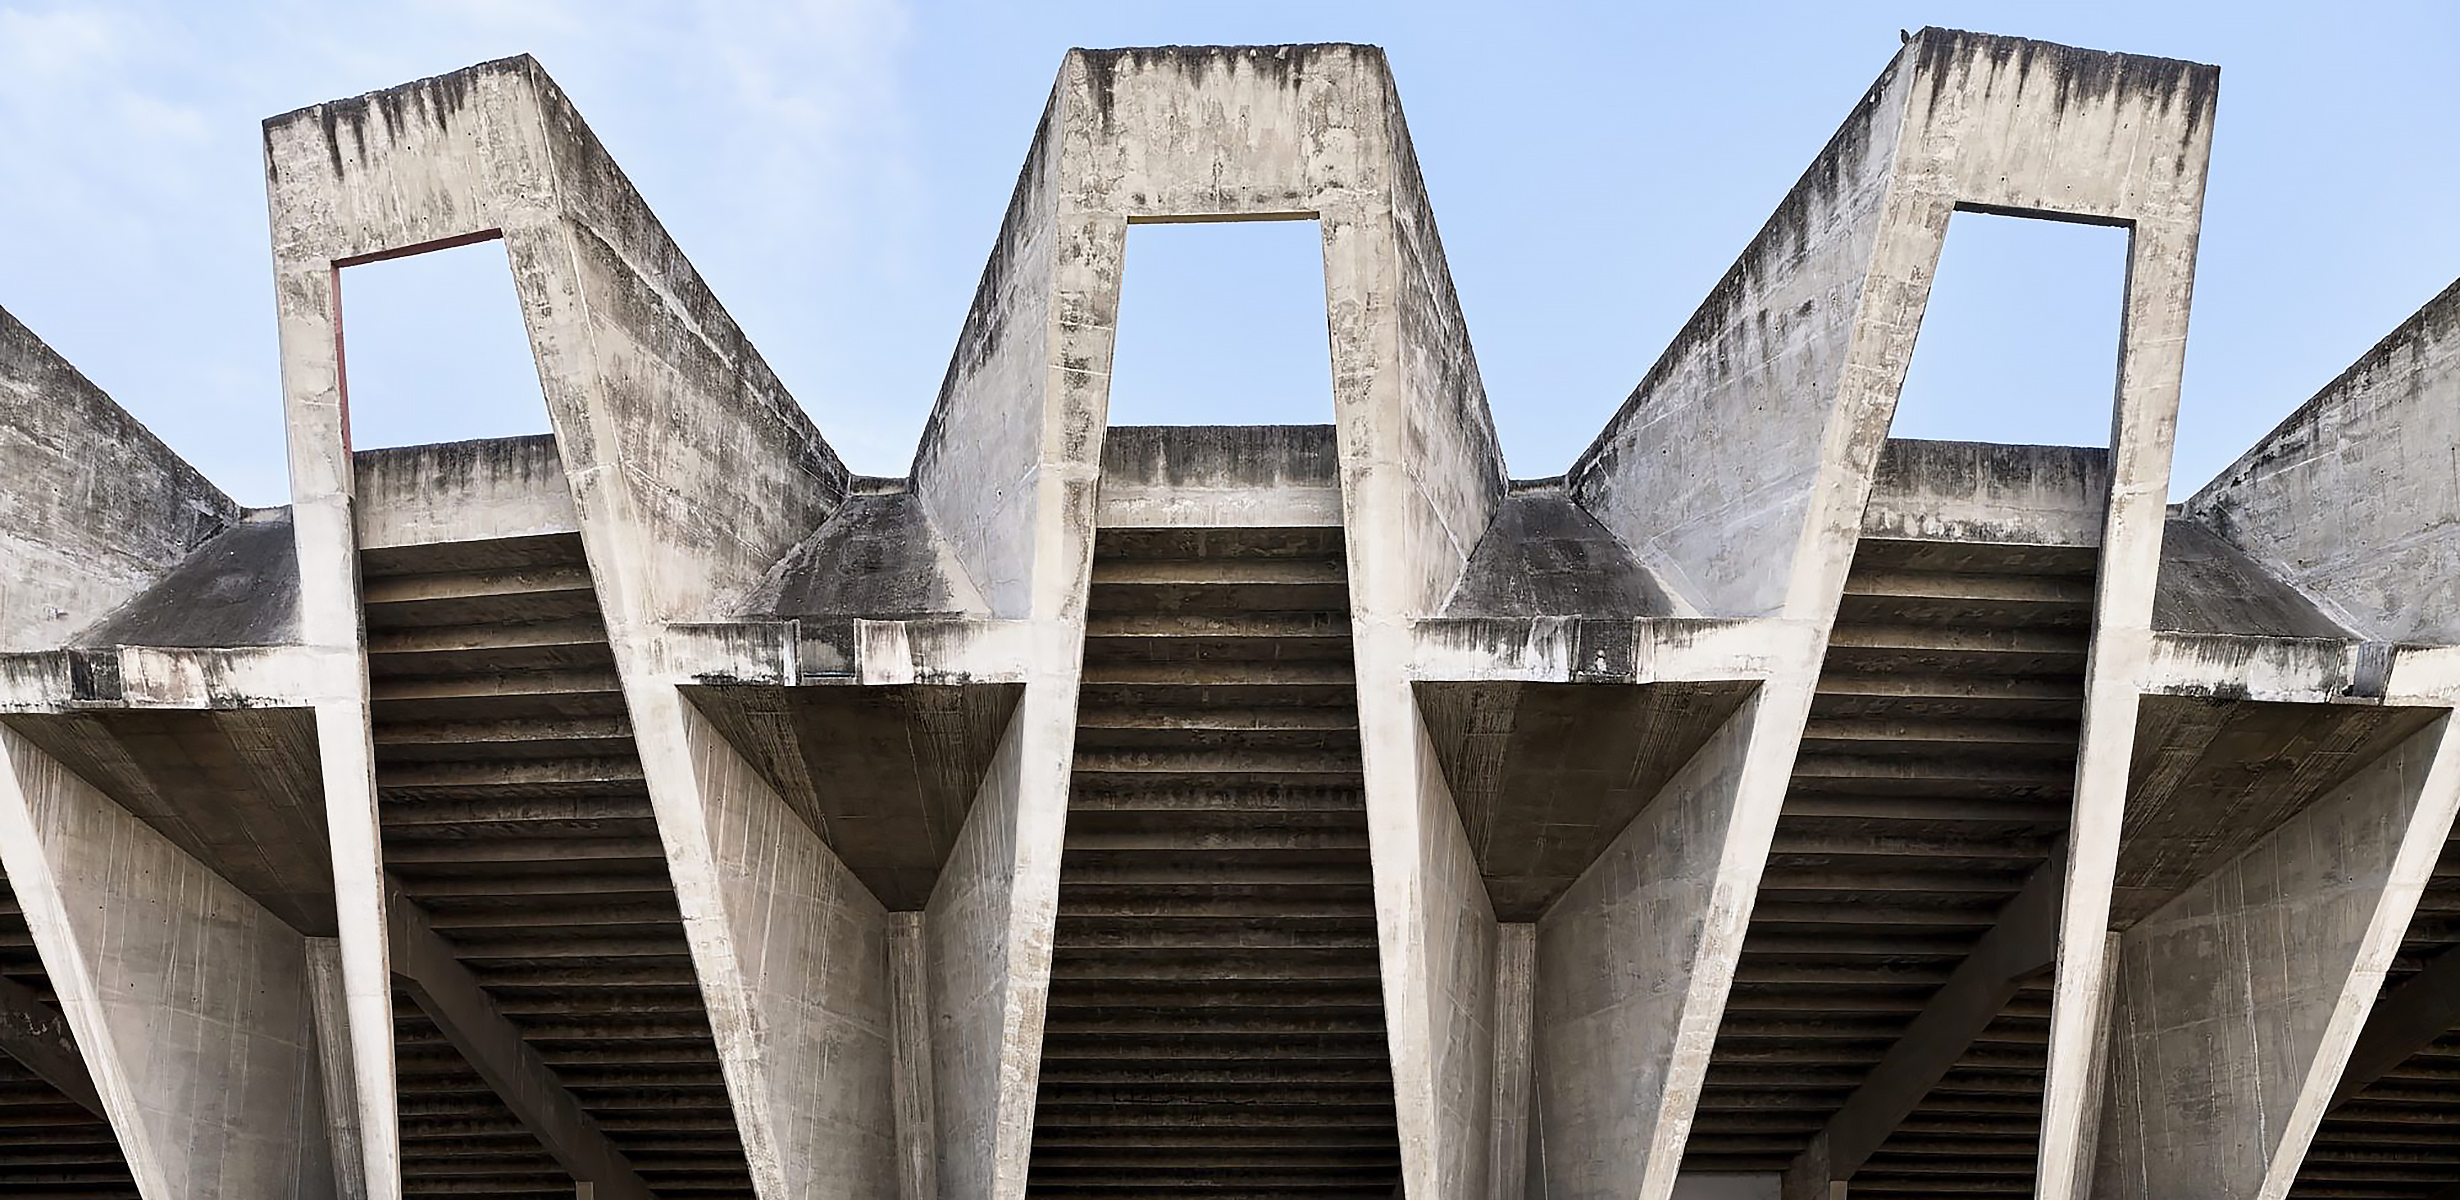 The Limits of South Asia’s Brutalist Utopias